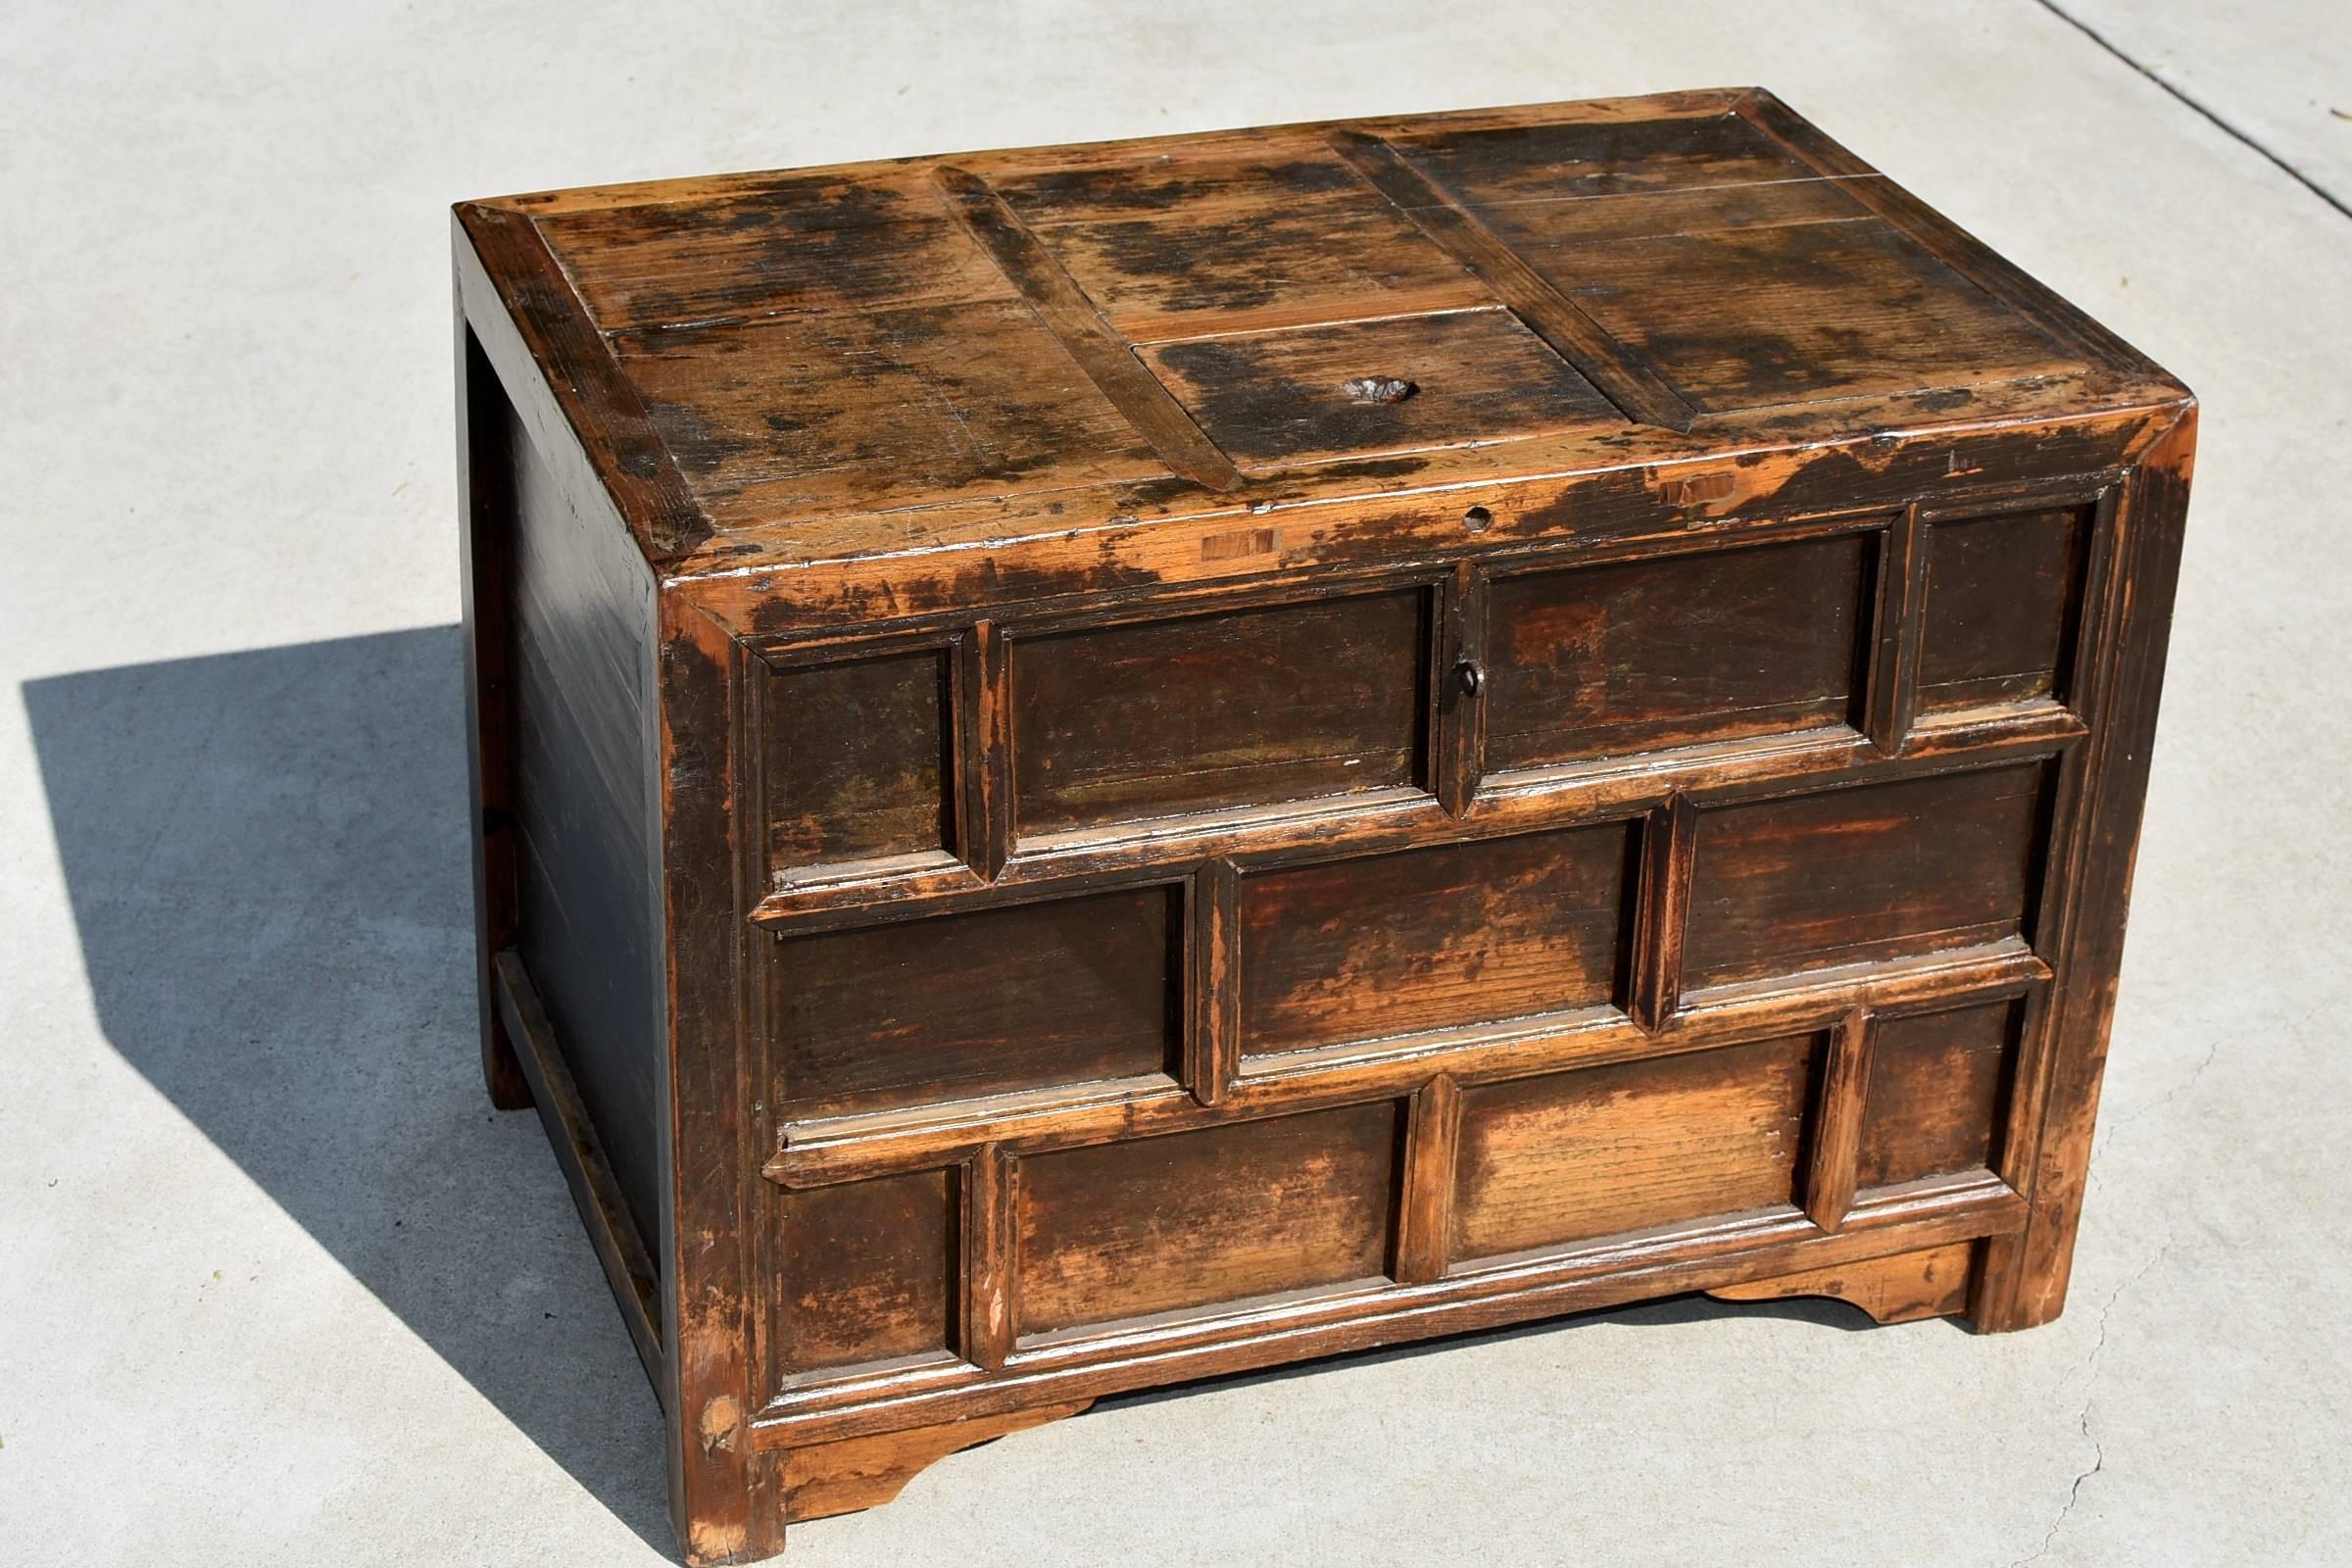 Rustic charming money chest was used by merchants in the 19th century to keep currency, especially coins. The chest is sealed all around except a top opening for maximum security. Vertical bars strengthen the construction, adding stability and